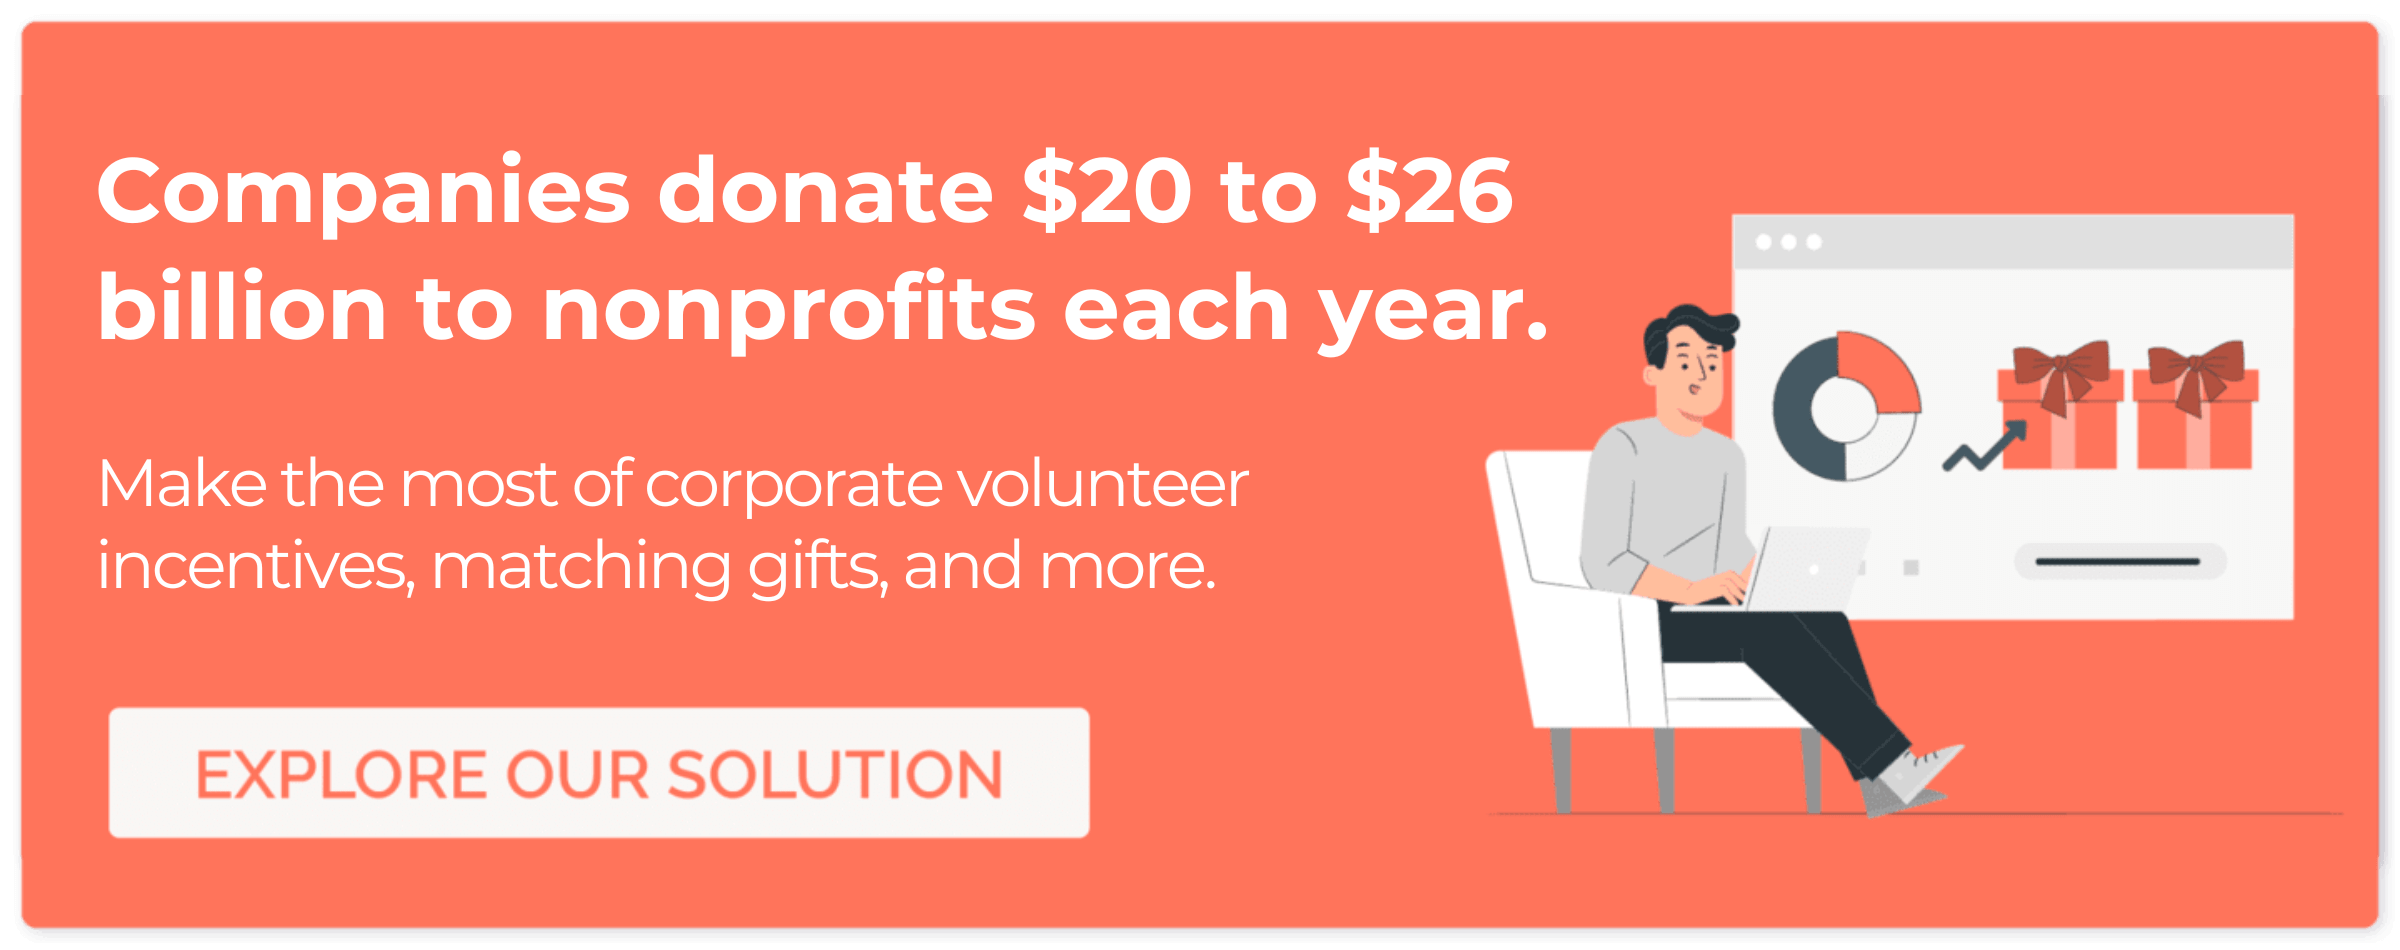 Use our software for identifying and tracking volunteer time off and other corporate giving opportunities.